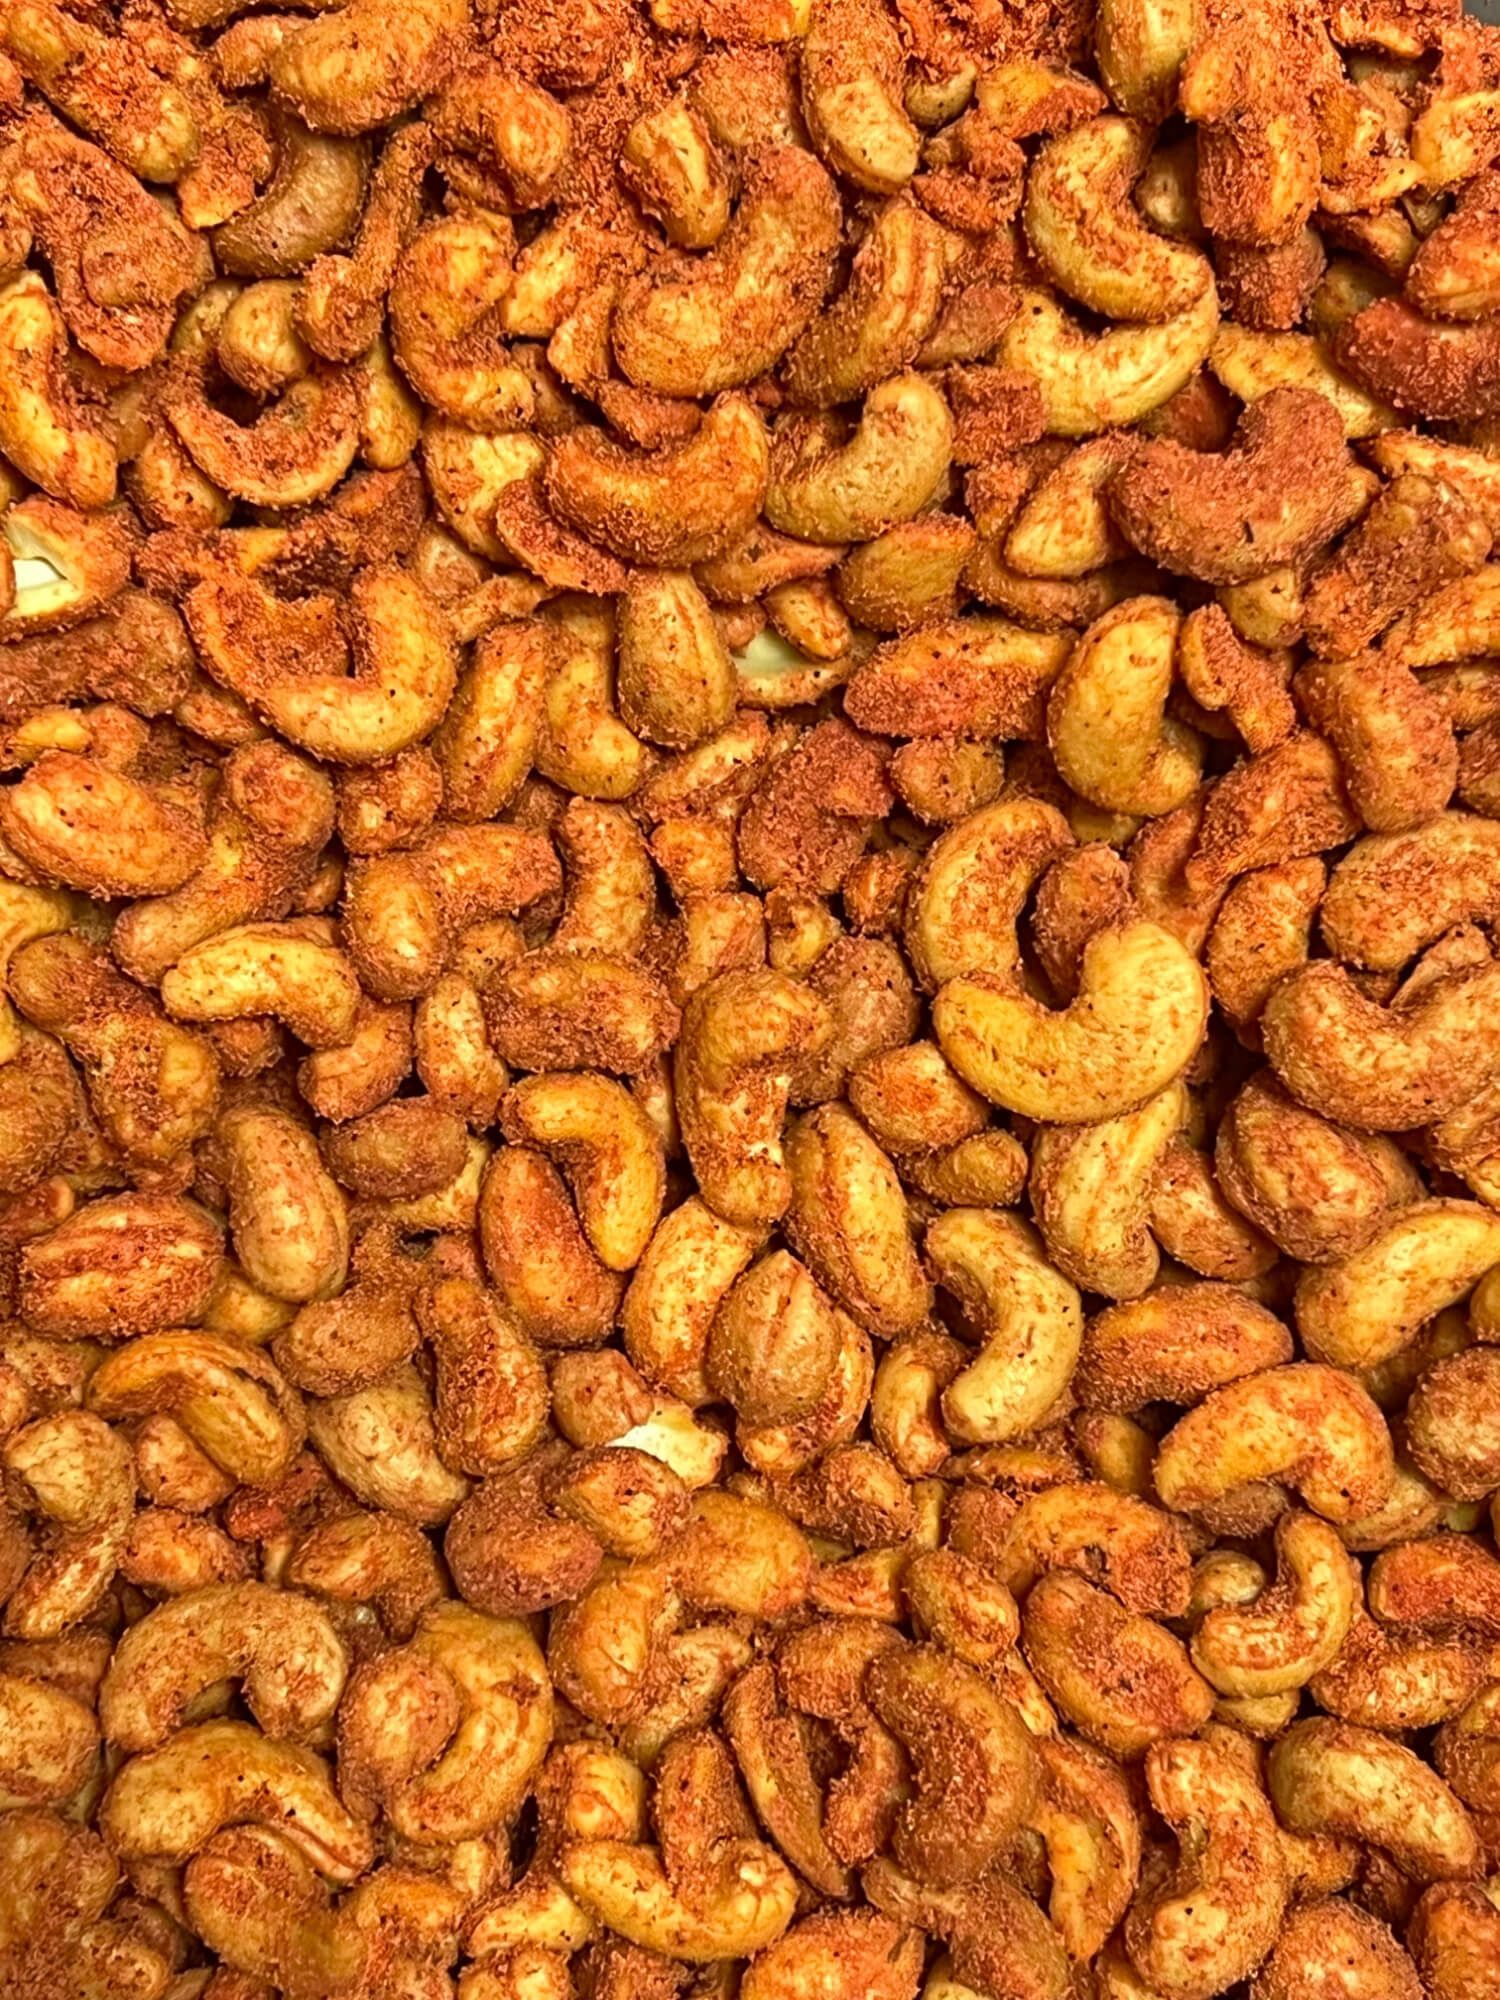 A close up of a pile of roasted cashews on a table.